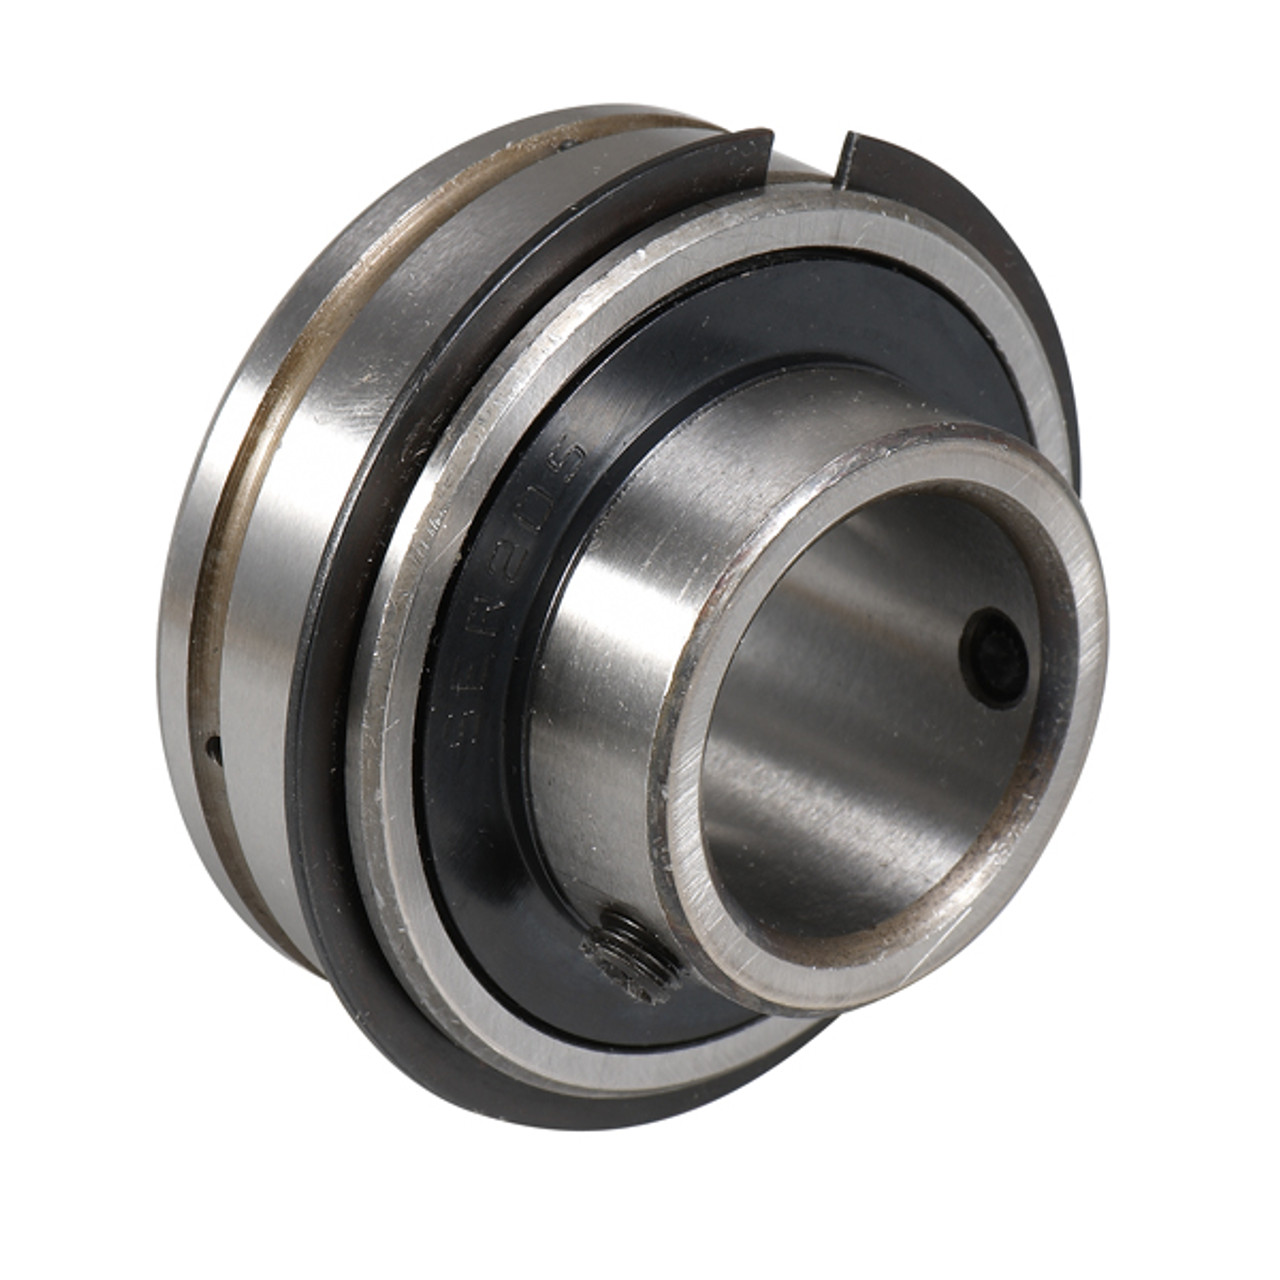 SER206-18 GENERIC 28.575mm Normal duty bearing insert with a parallel outer race and grubscrew locking - Imperial Thumbnail